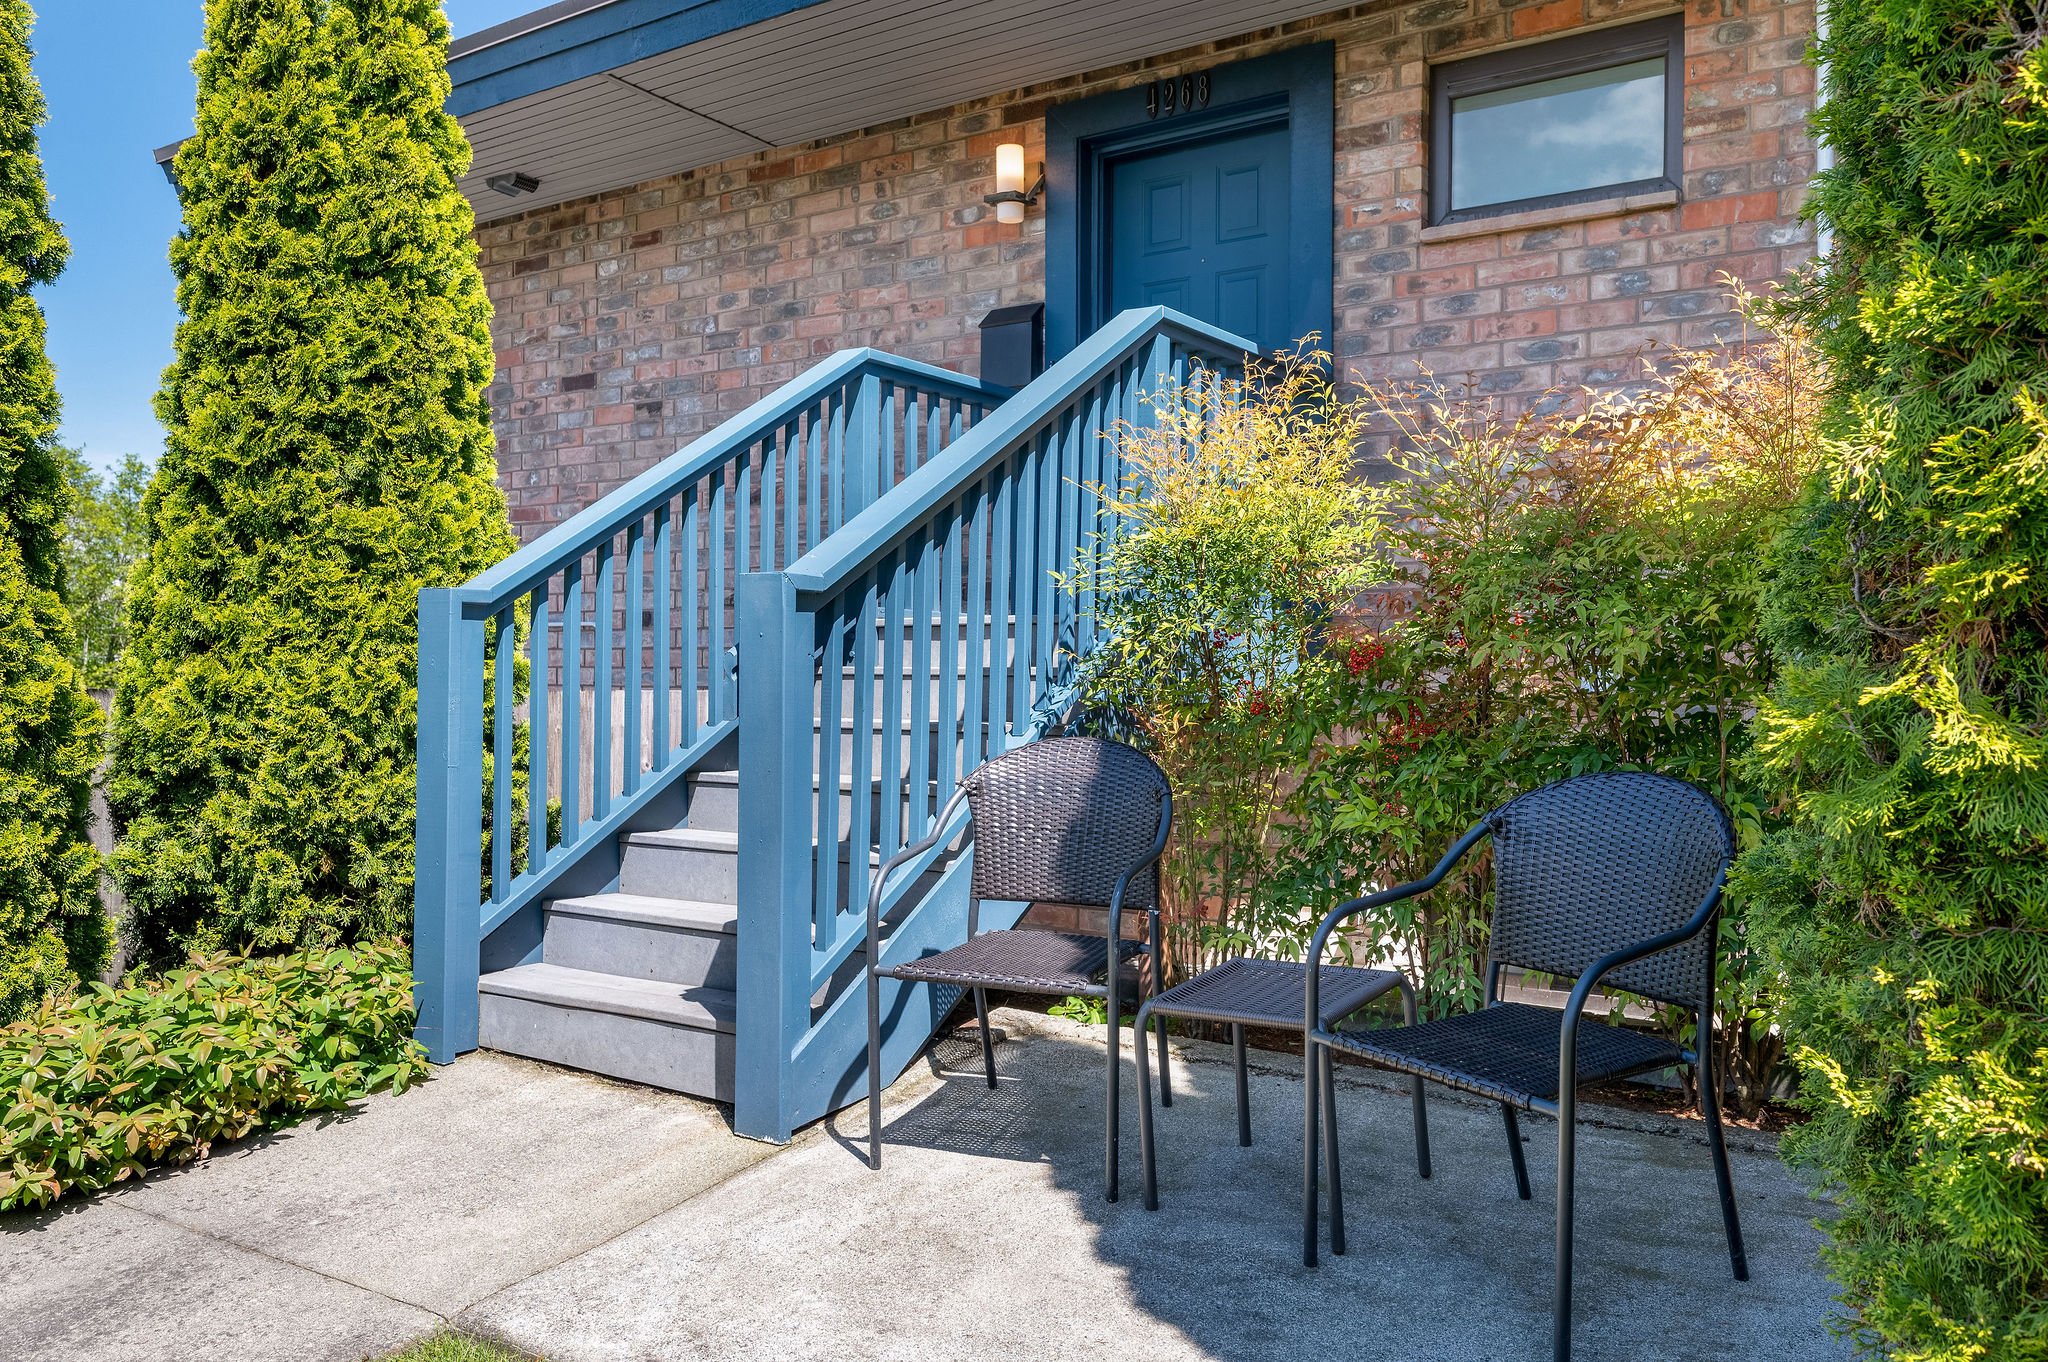  Image description: exterior of condo with stairs, small garden and patio furniture 